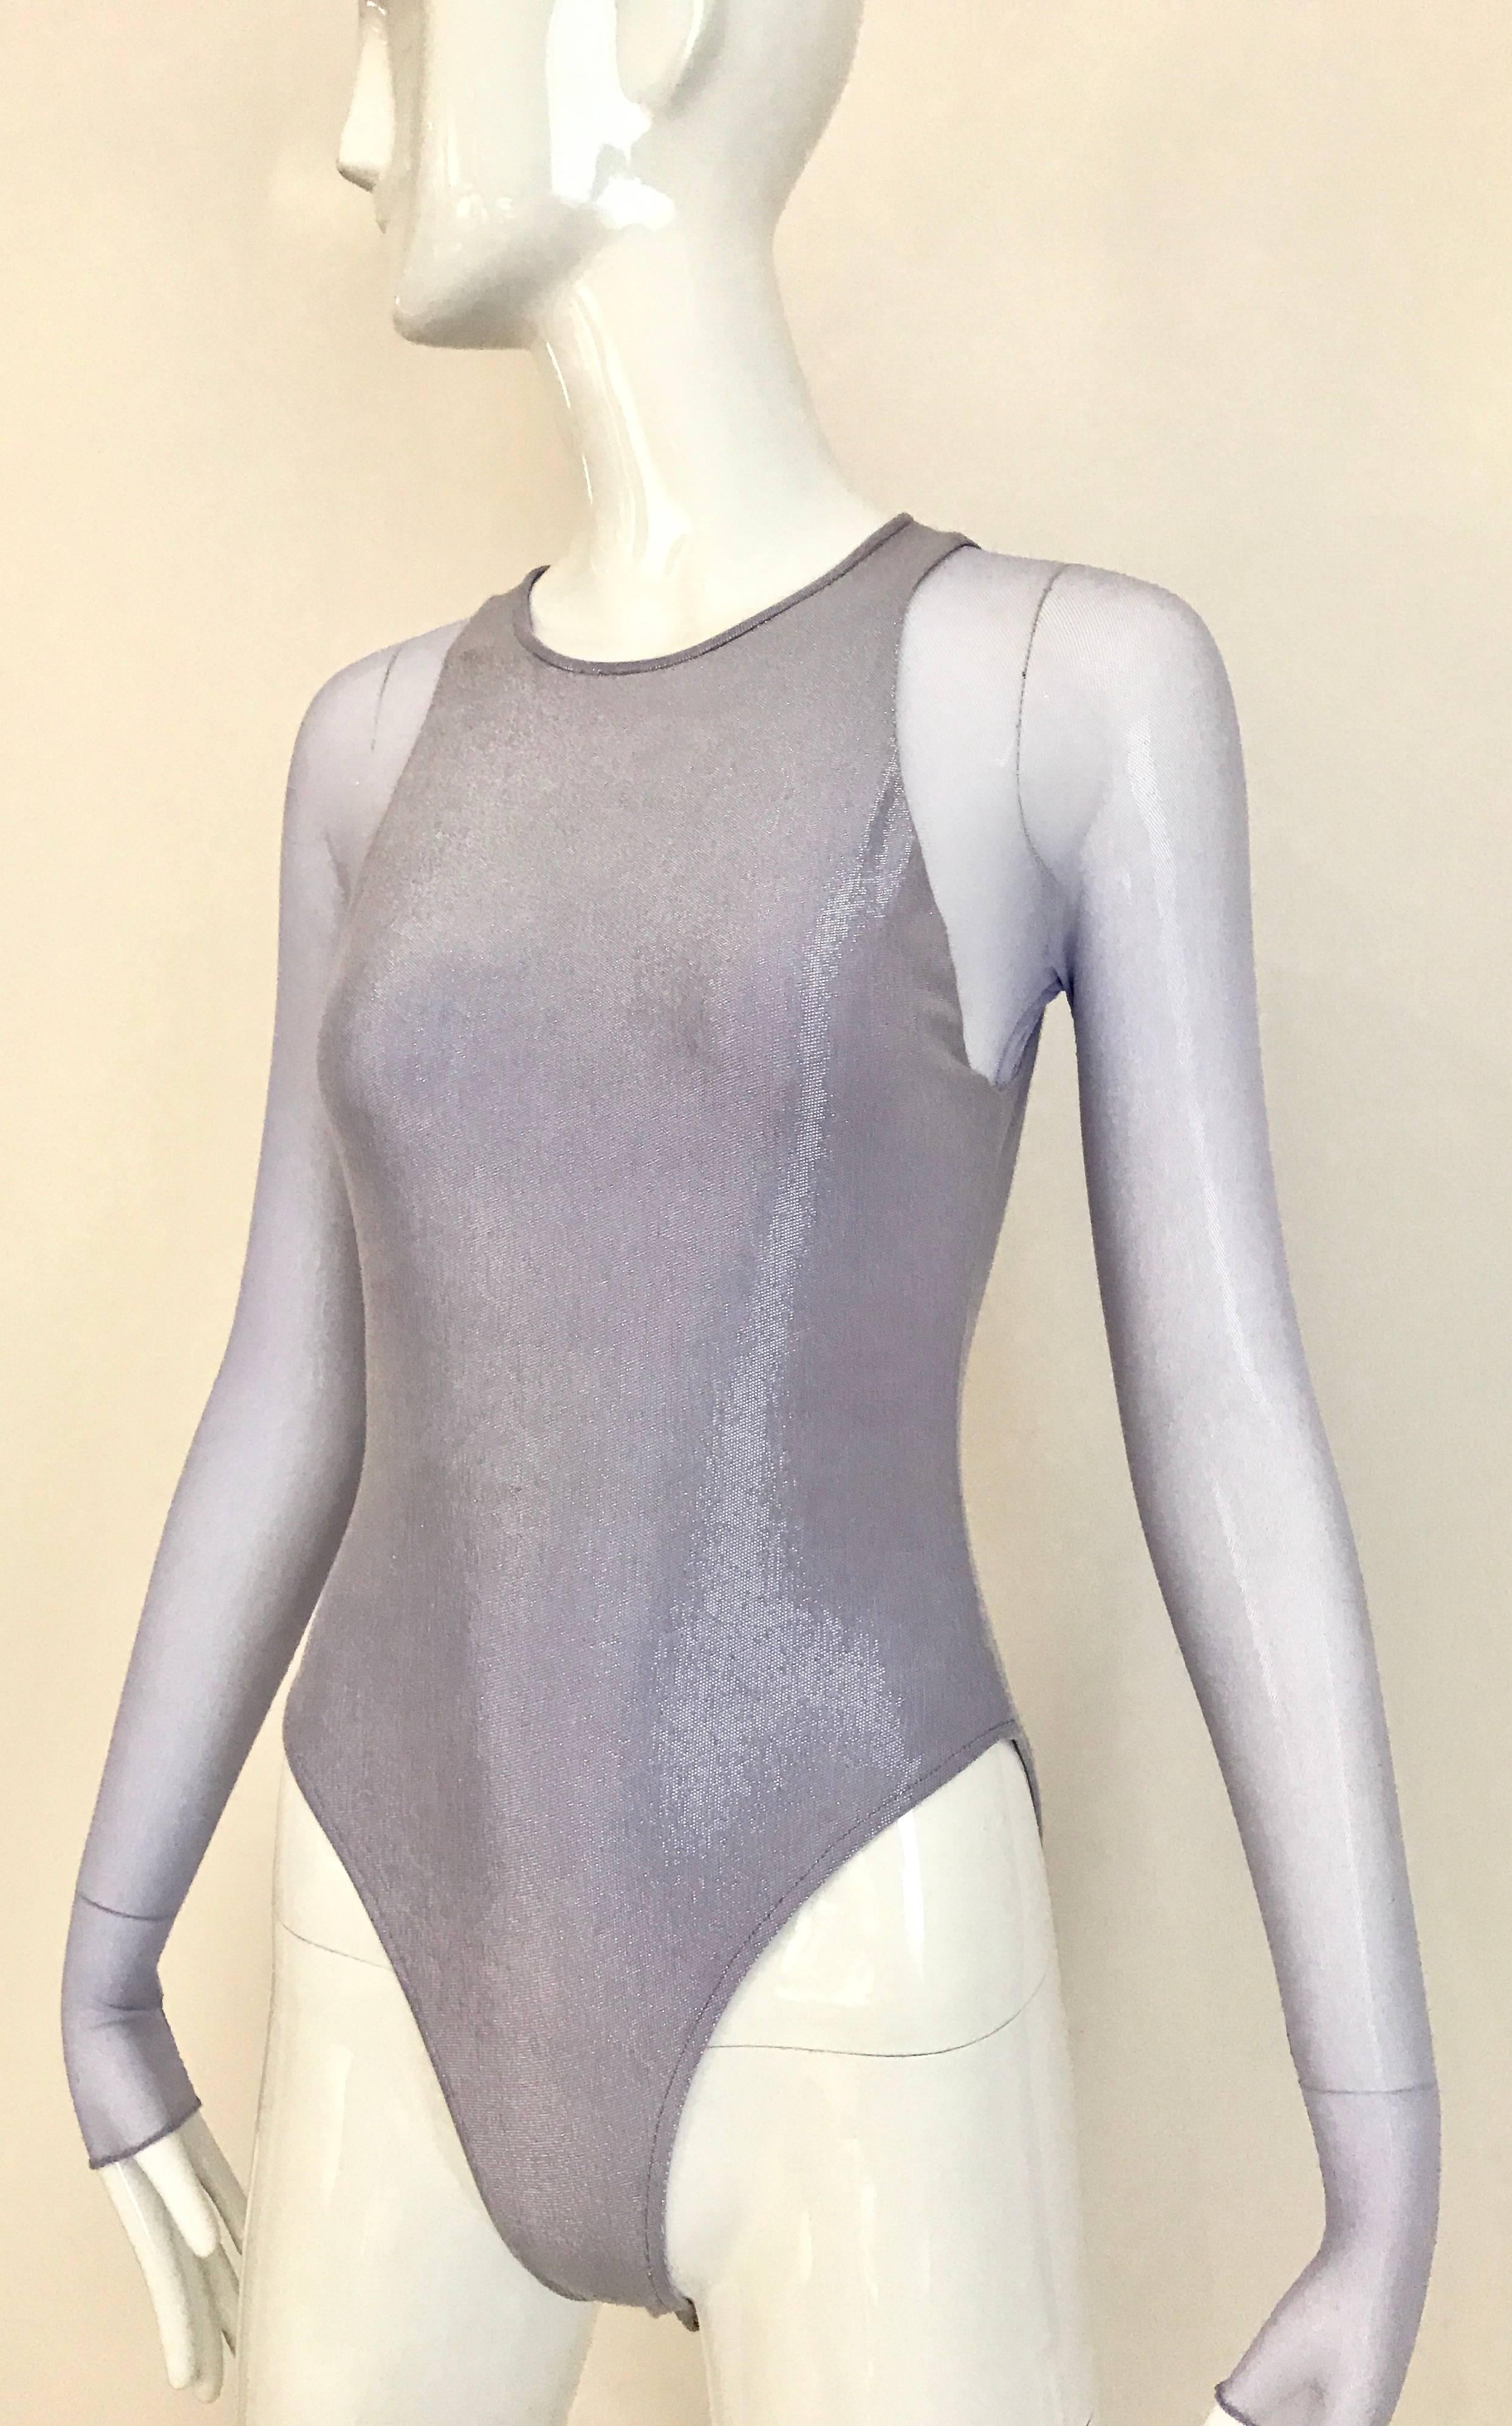 Vintage 1990s Giorgio Di Sant Angelo Lilac Metallic Long Sleeve Body Suit. or bathing suit . Sheer Sleeves and shimmer lilac bodice. Snap on body suit. Excellent Condition.
Fit best US size 0/2/4 max.
Bust: 30 inch  stretch up to 34 Inch
Waist: 24